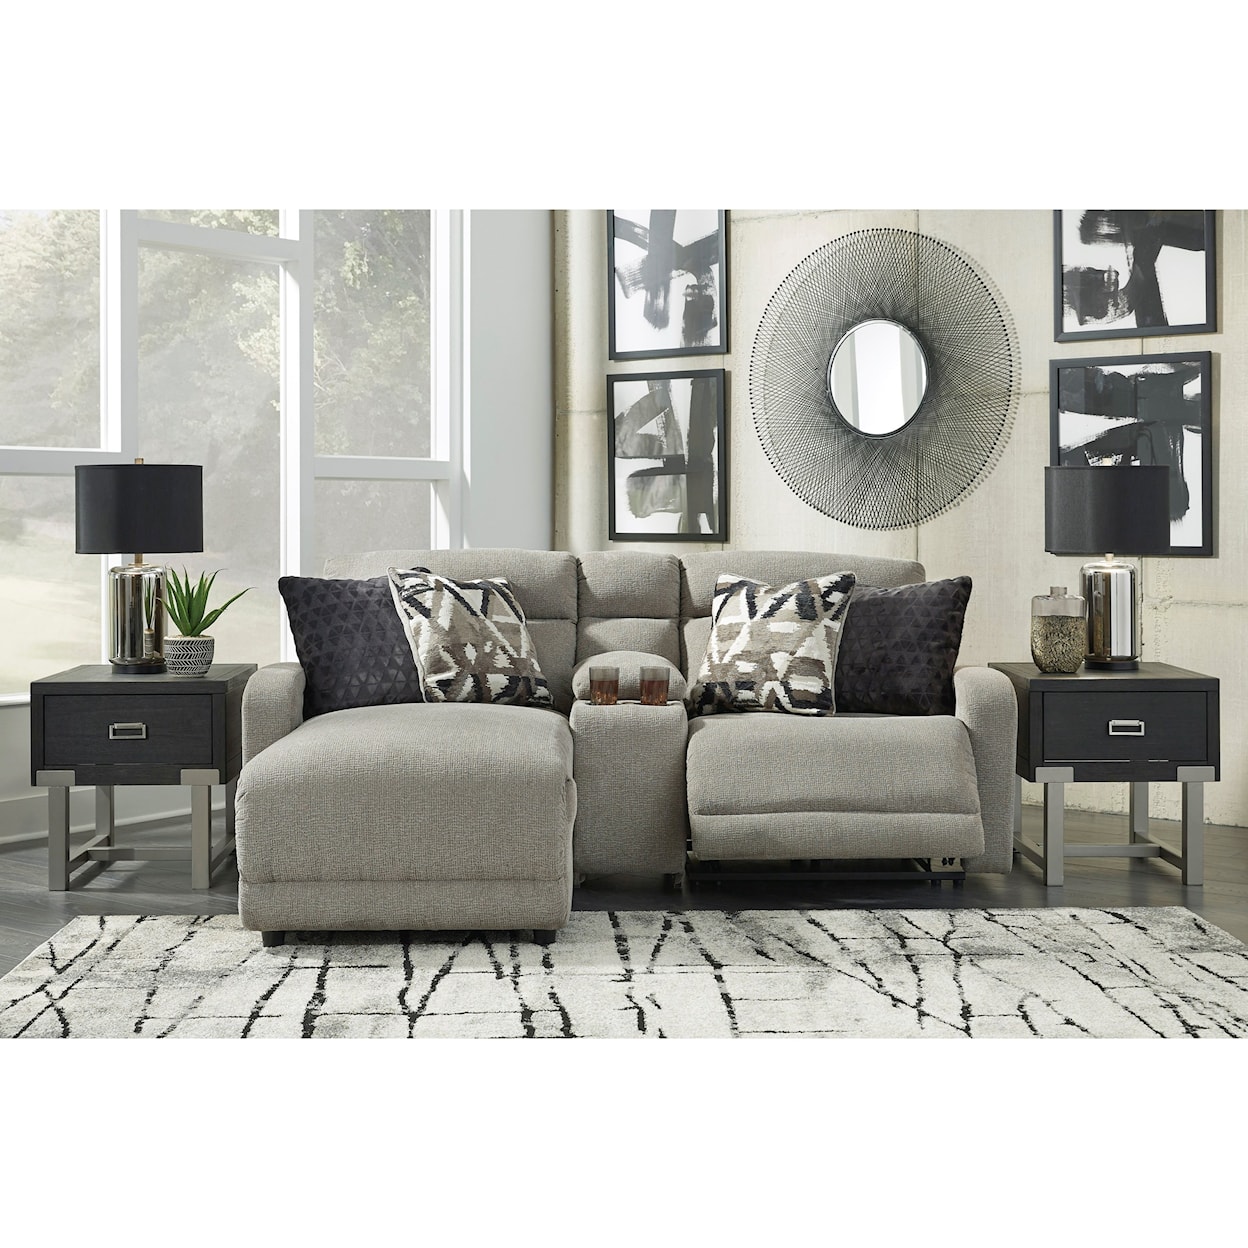 Signature Design Colleyville 3-Piece Pwr Reclining Sectional with Chaise